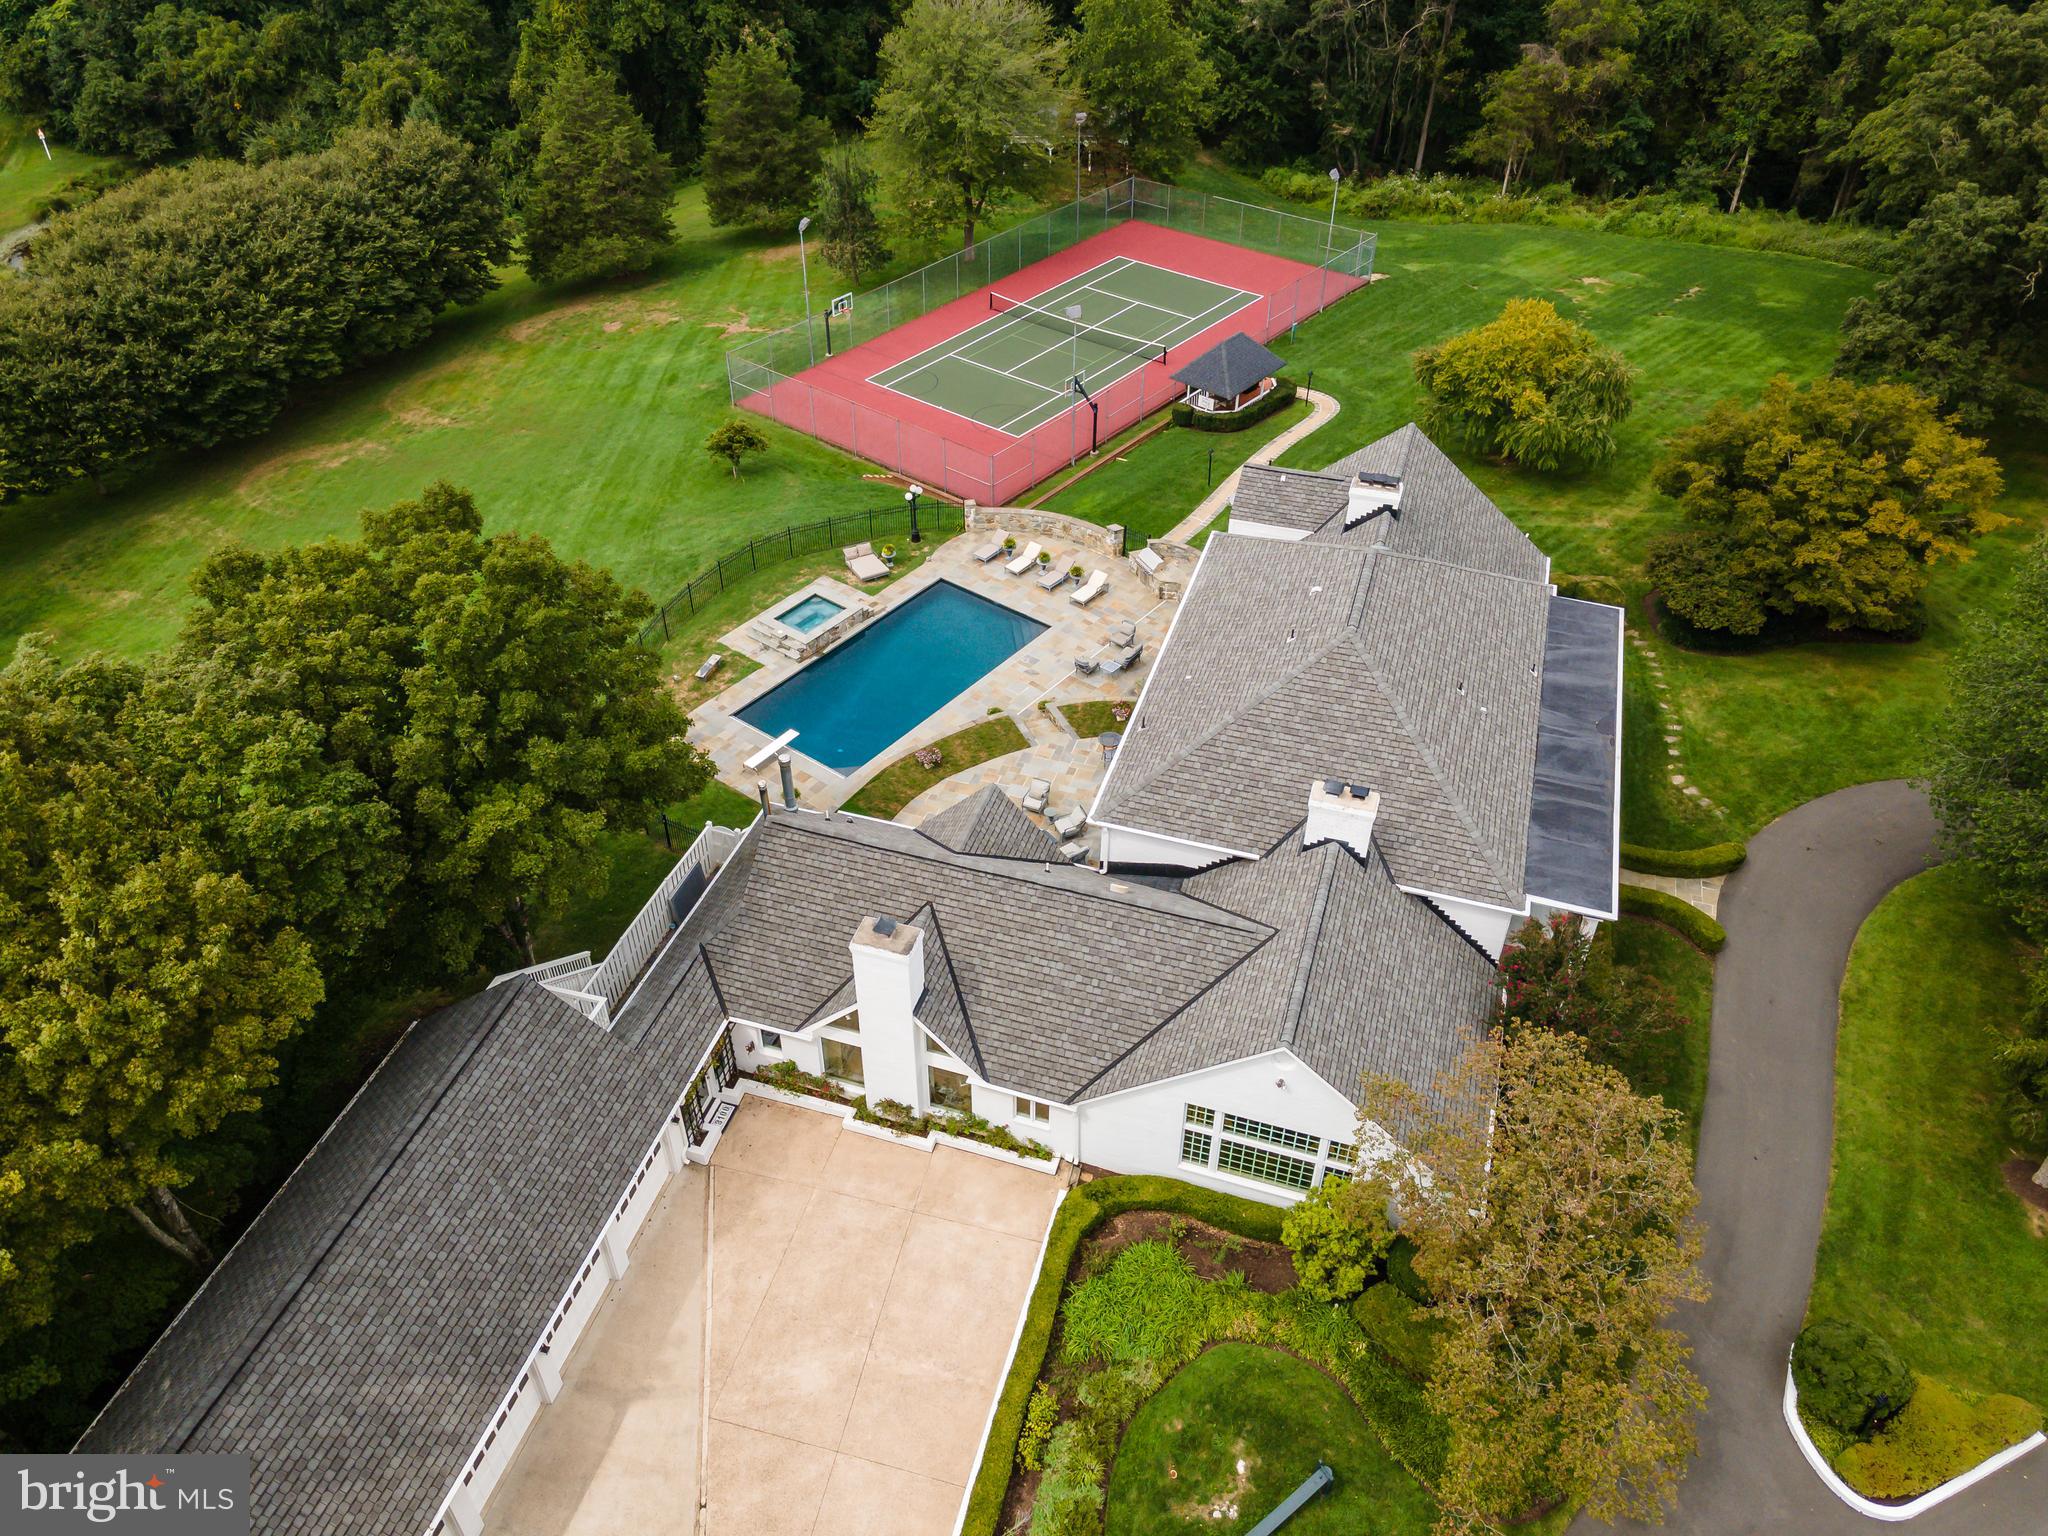 an aerial view of a house with pool outdoor seating and yard